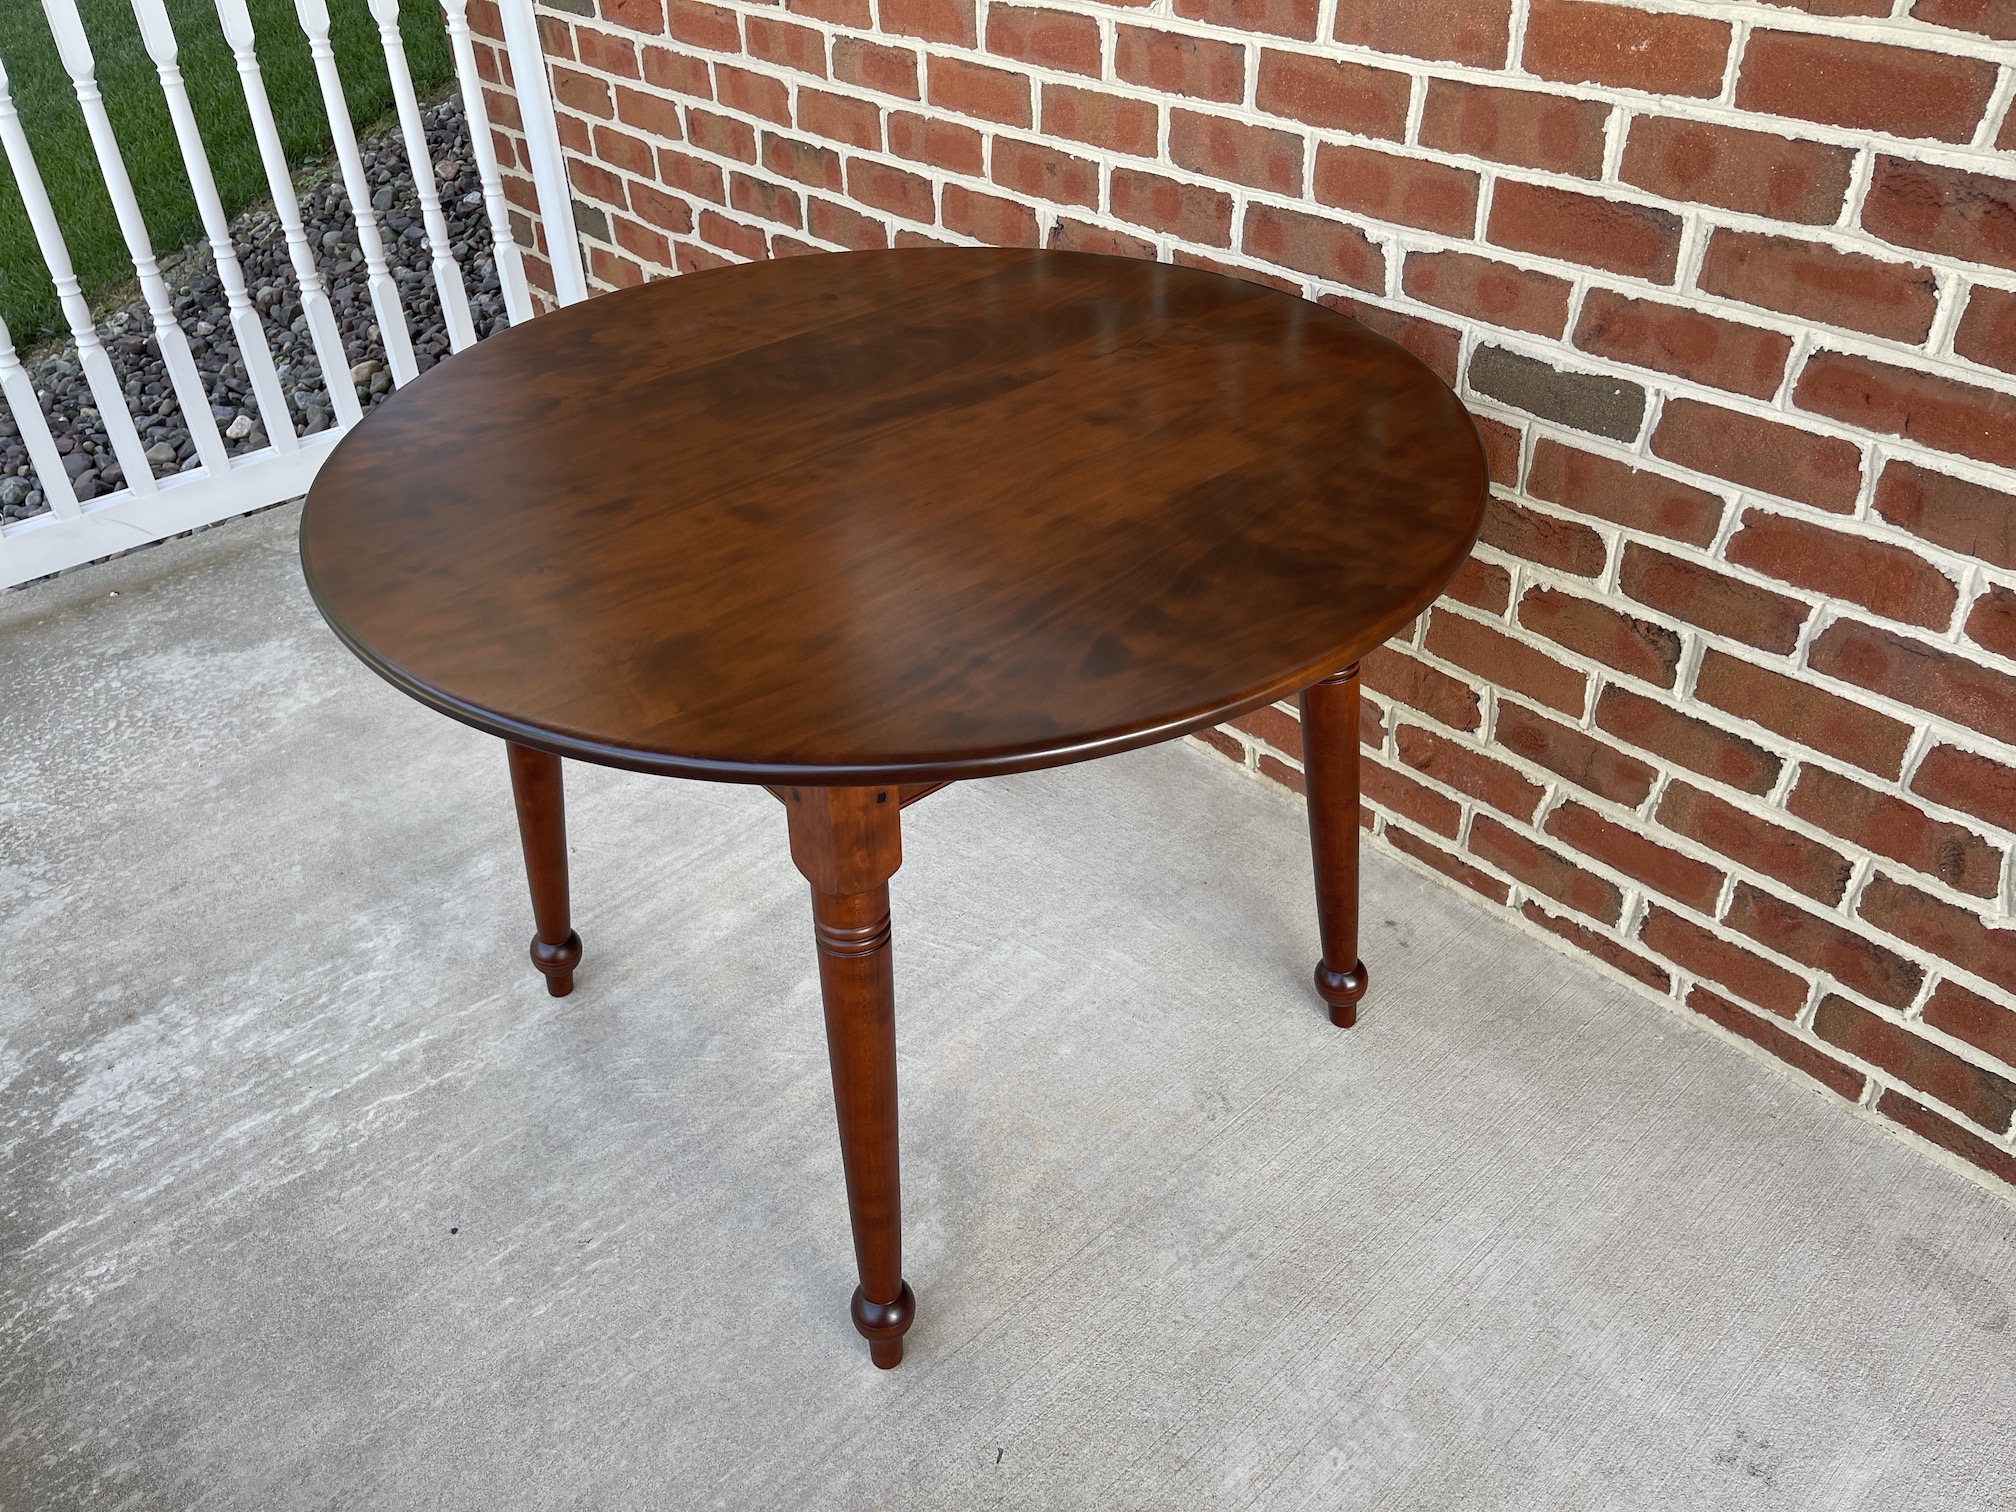 Round Cherry Wood Country Splay Leg Table Image